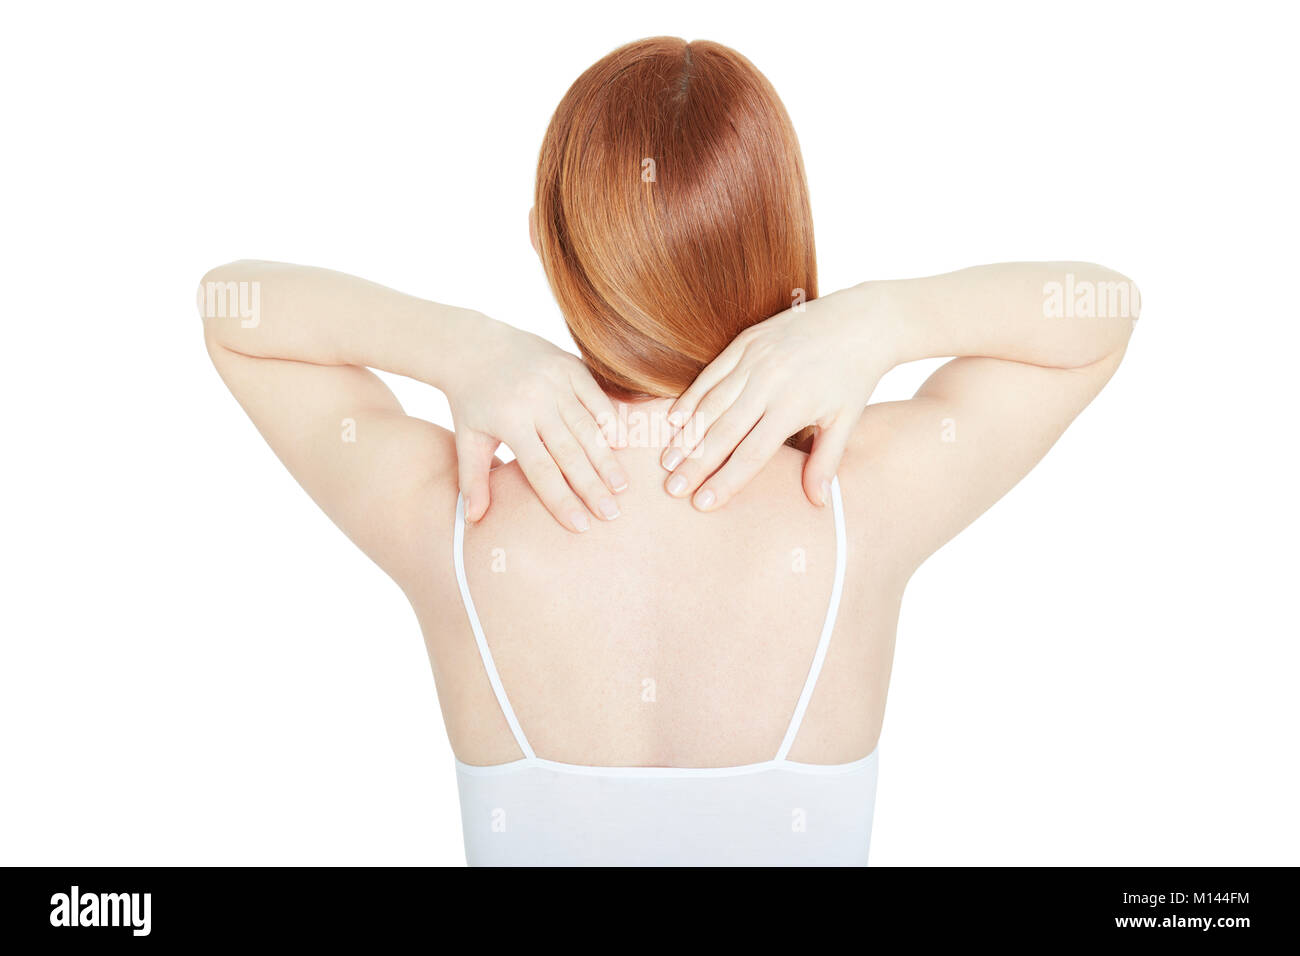 Woman with Upper Back and Neck Pain Stock Photo - Image of strain, bare:  34197722